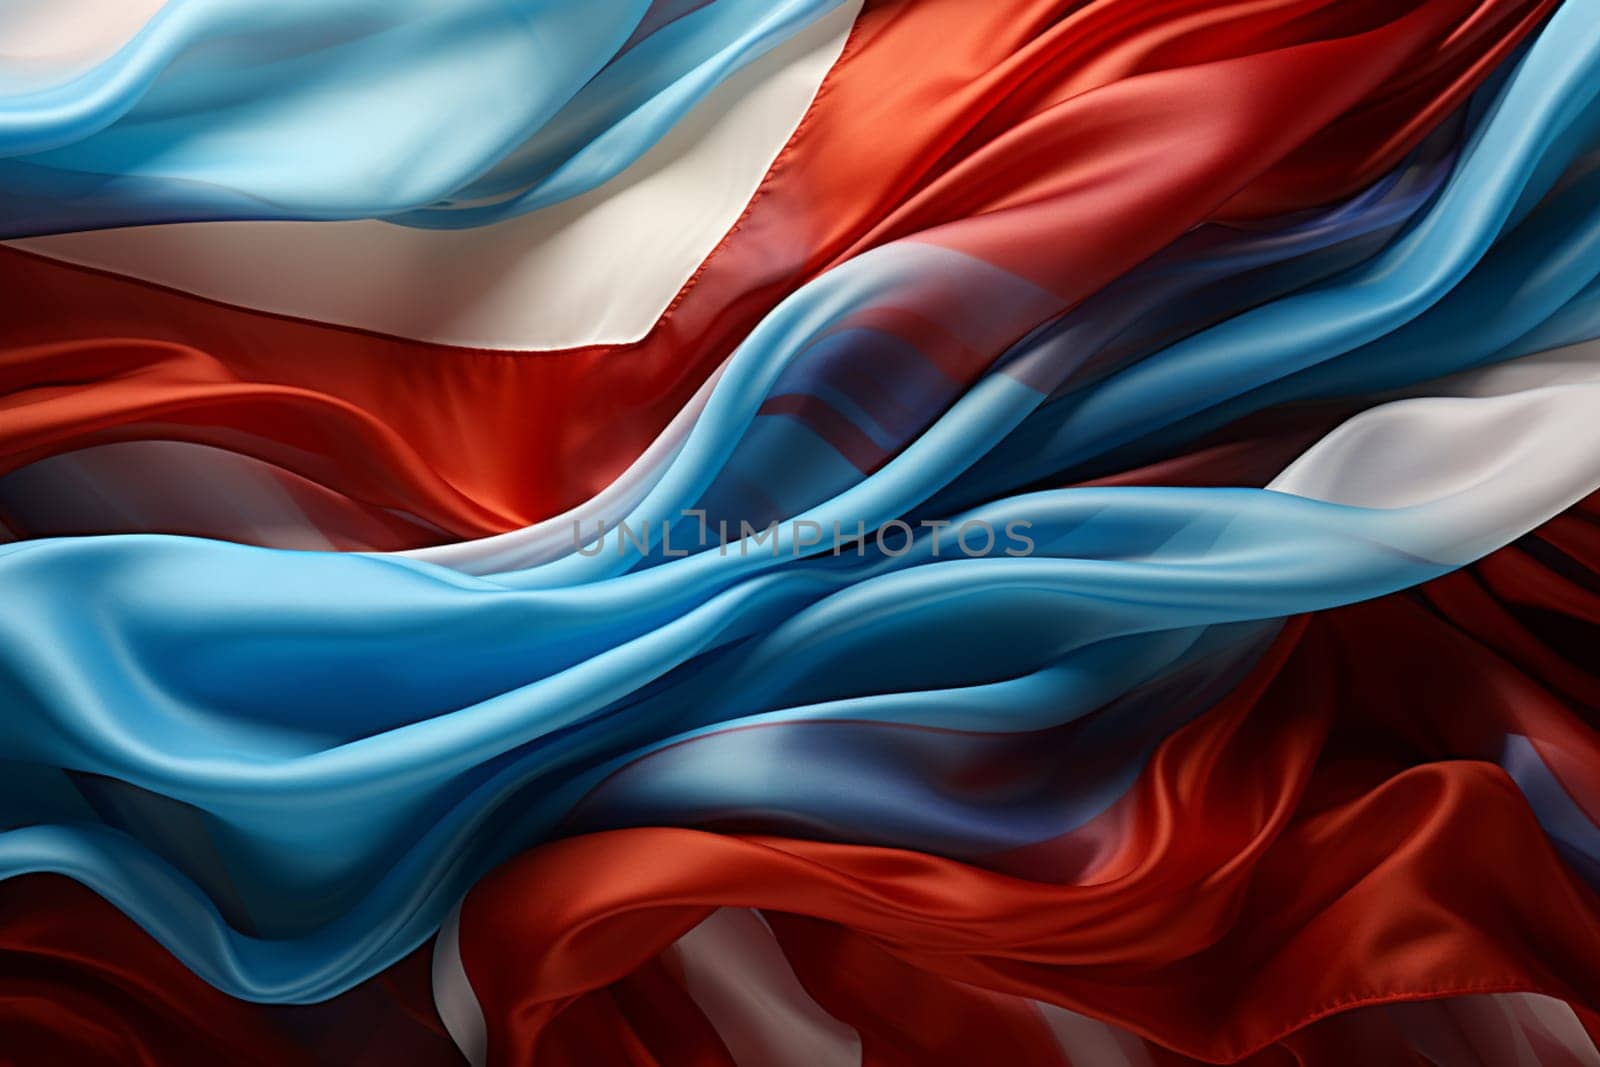 3D Illustration of TriColor Cut Ribbons Waving - Isolated by Andelov13